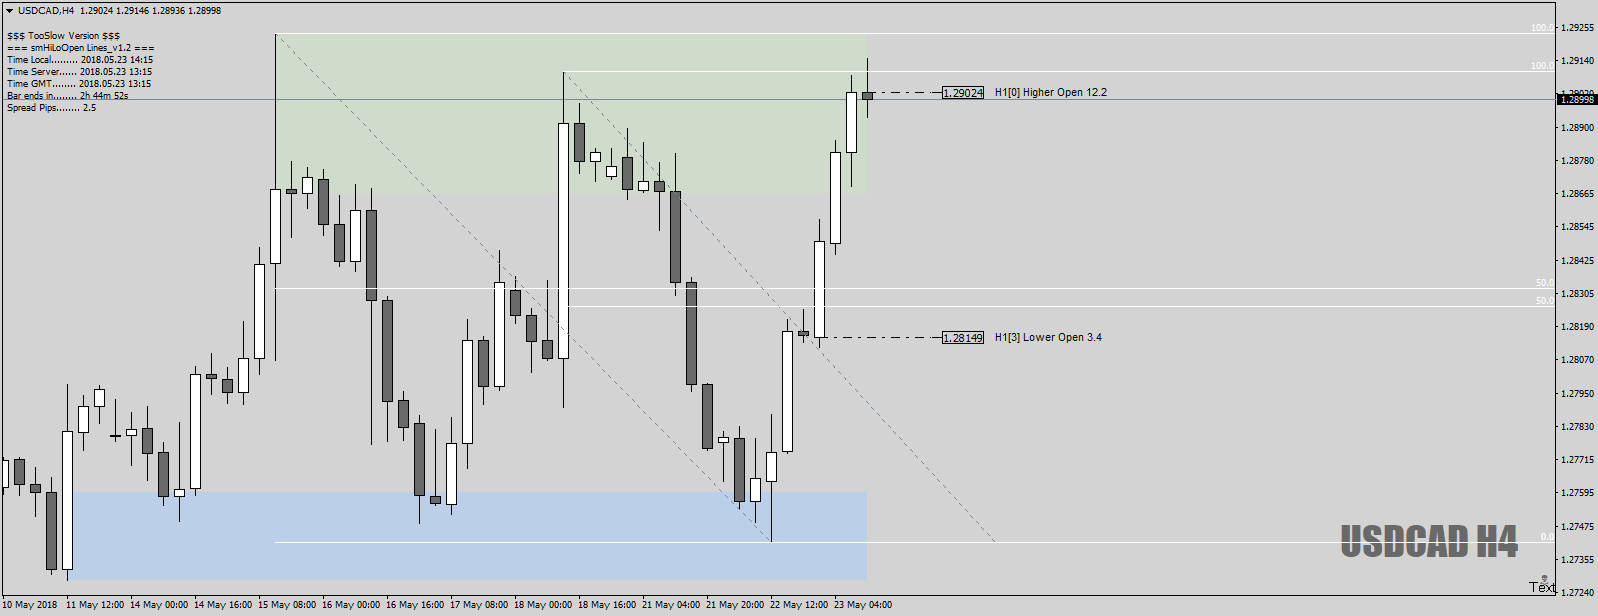 USDCADH4andthefibs23rdmay18.png